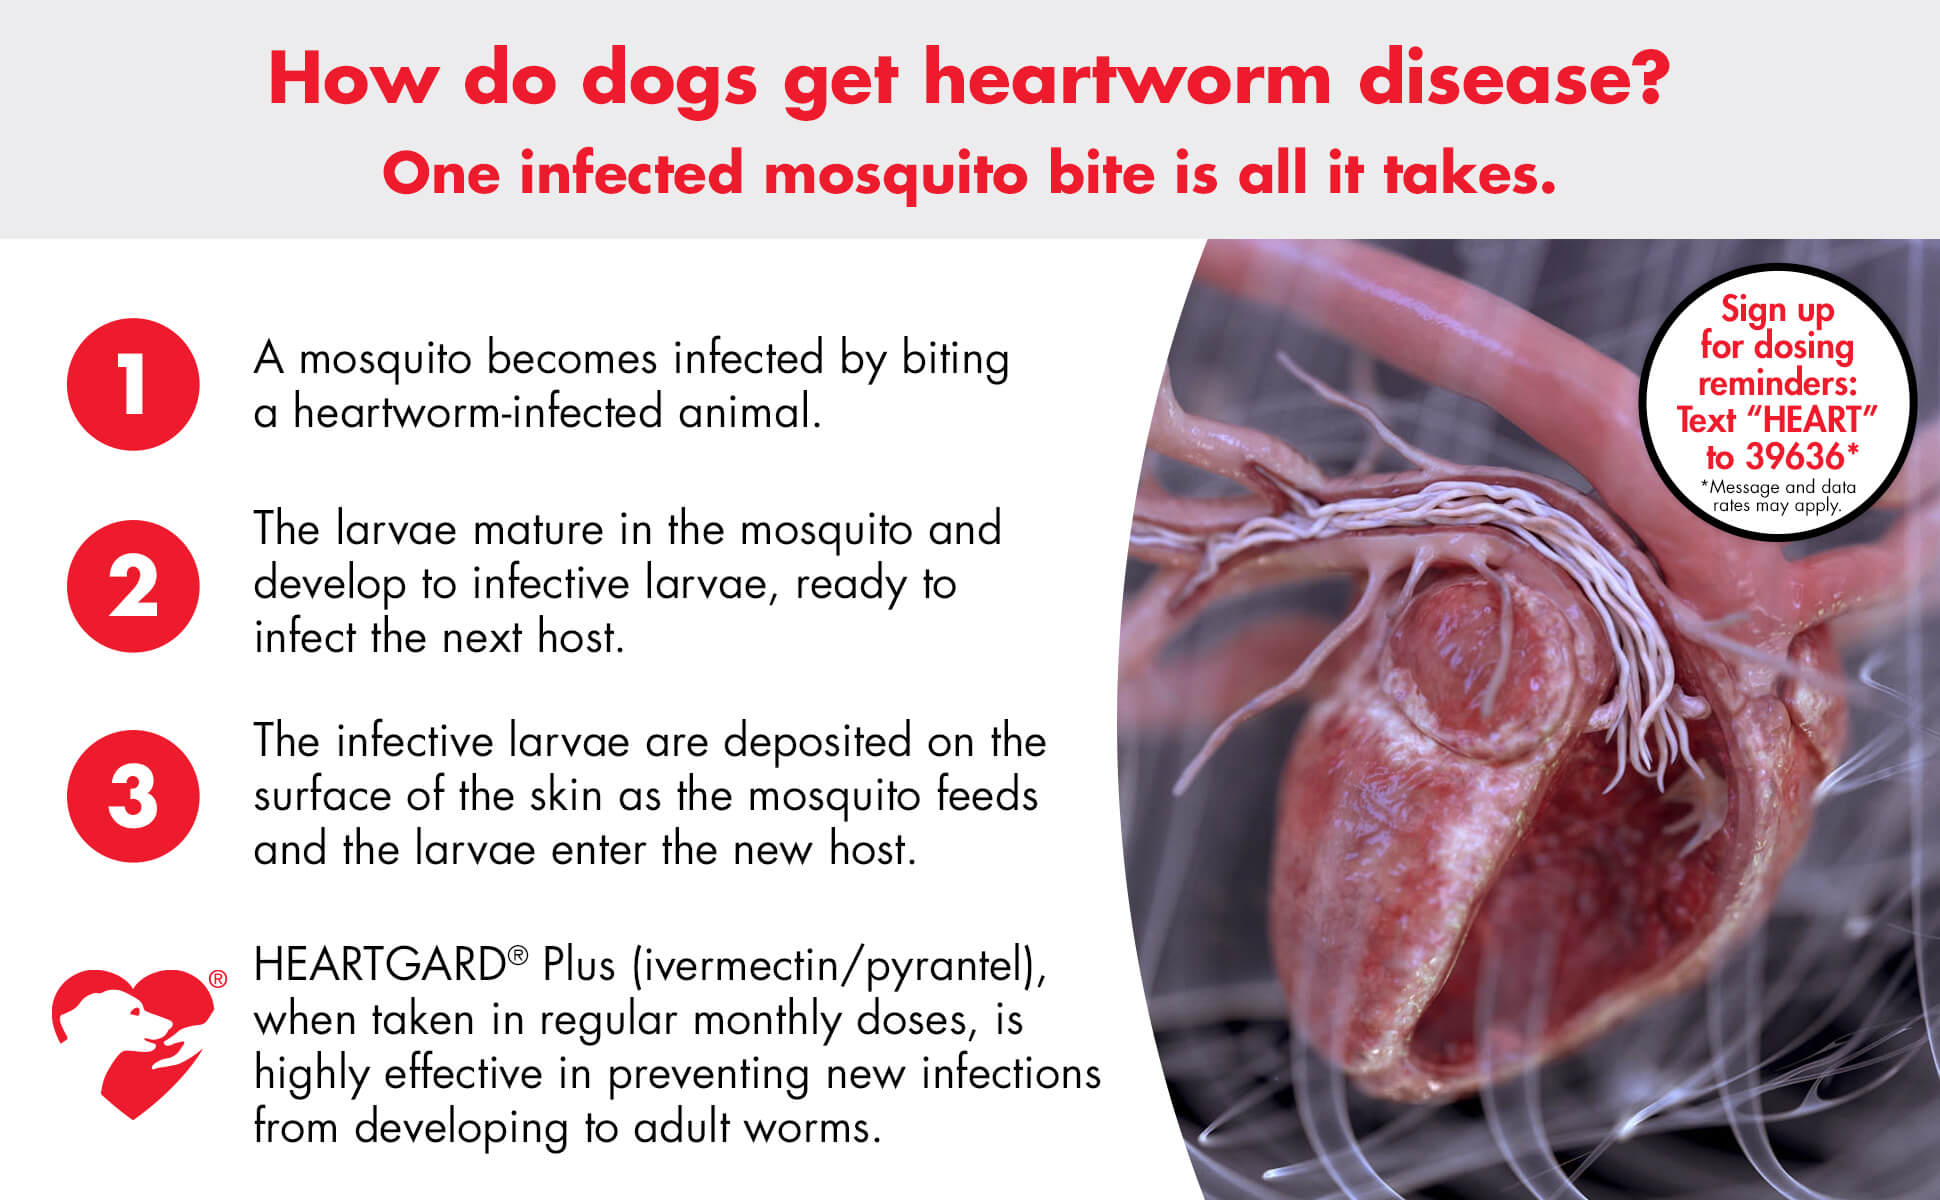 How do dogs get heartworm disease? One infected mosquito bite is all it takes!